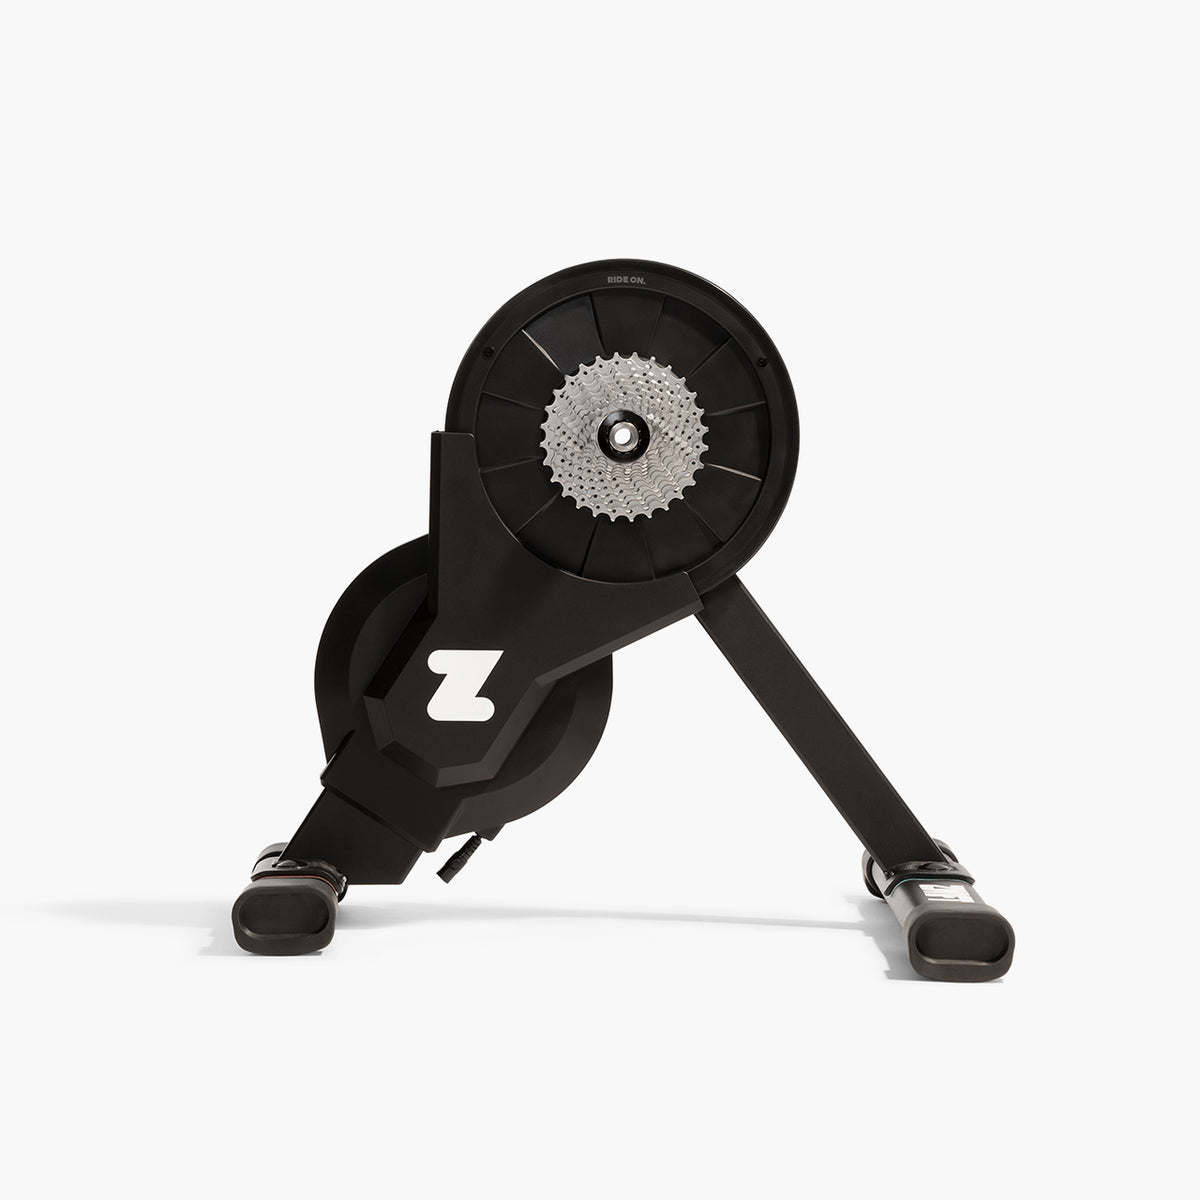 Zwift Hub Smart Turbo Trainer with 11 speed cassette